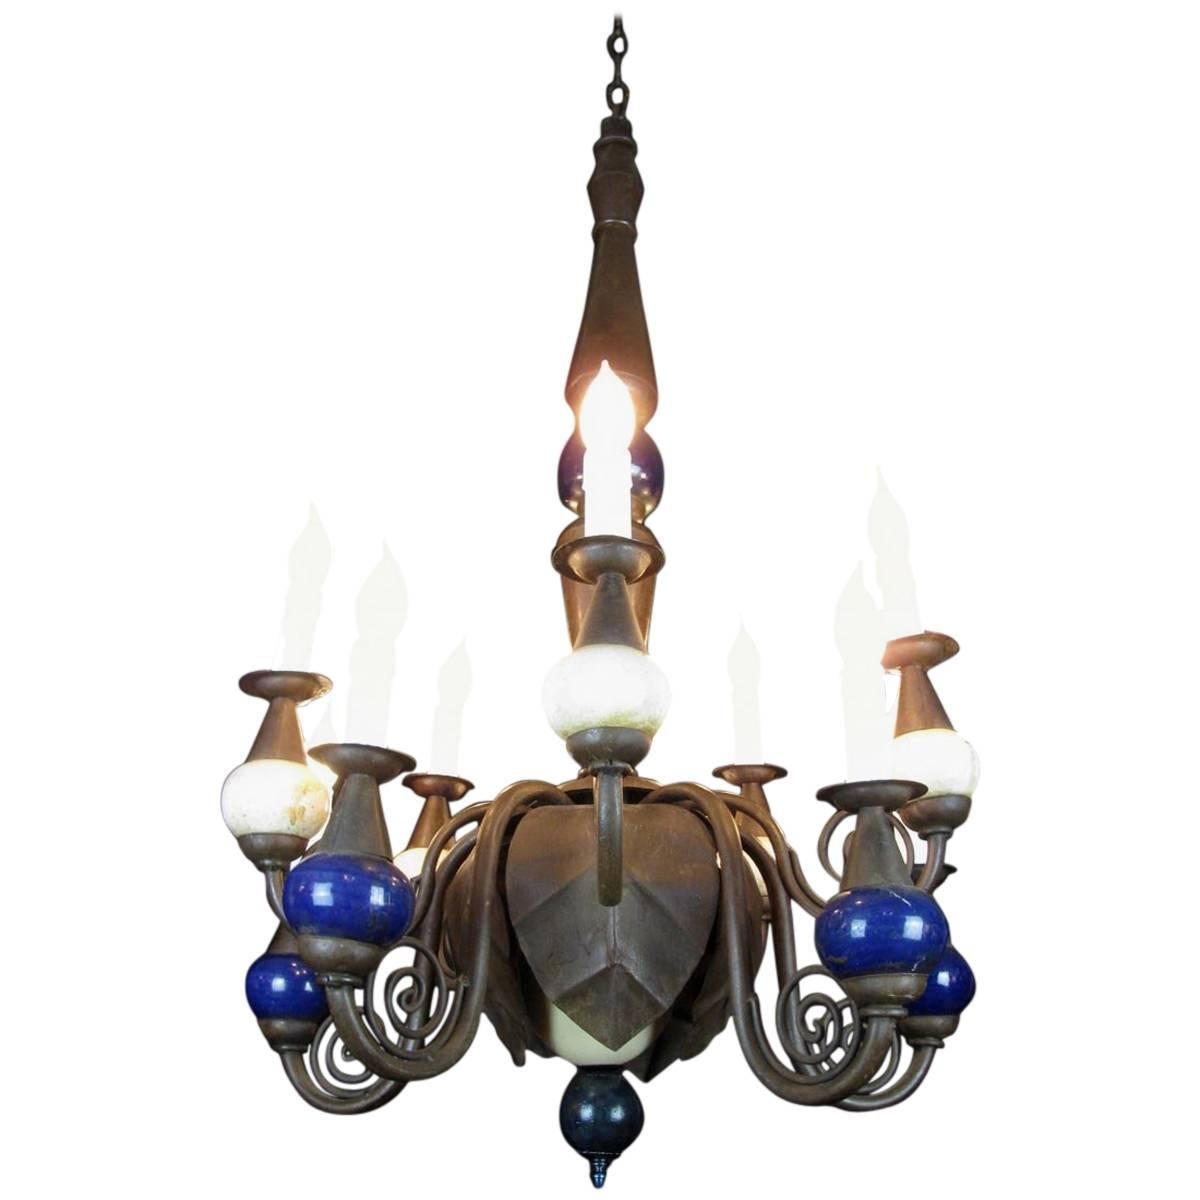 Early 20th century Italian iron two-tier ten-light chandelier, in good condition, restored and rewired. Of Italian origin, handcrafted, this is a unique work of art coming from a Milanese private palazzo.
Unusual structure with ten curved scrolling